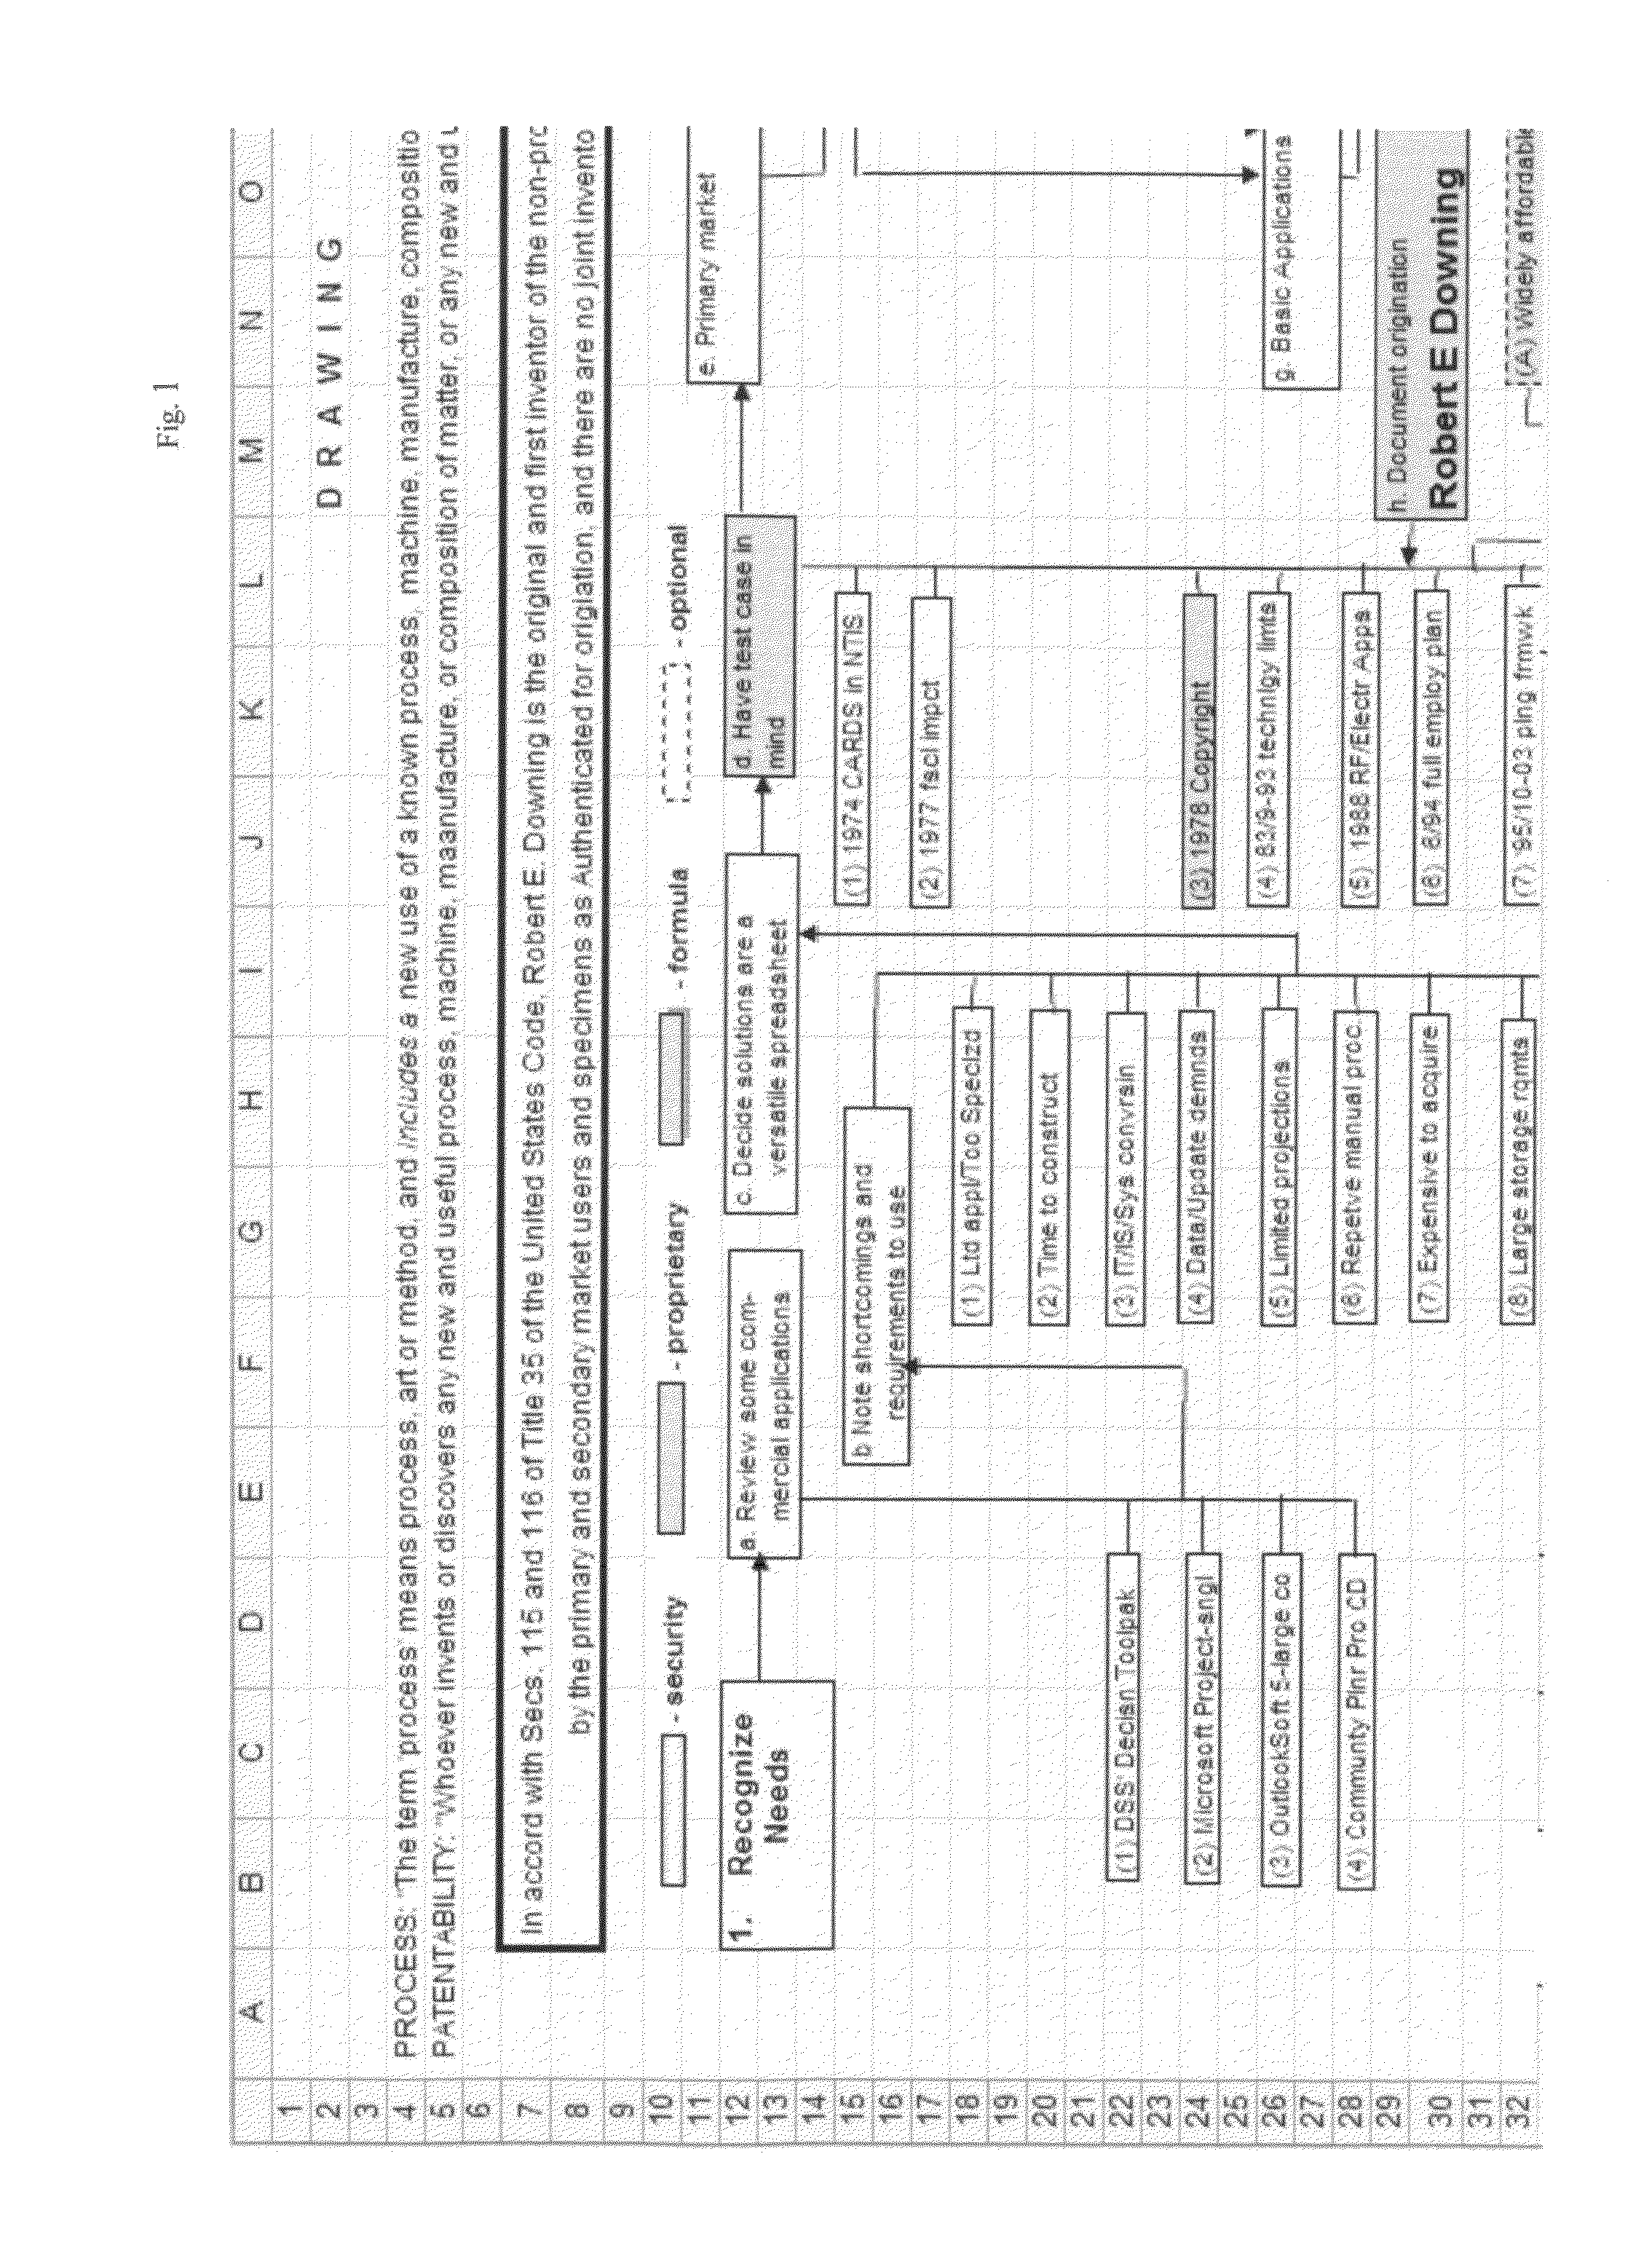 Method and electronic integrated model generically facilitating efficiency with diffusion-based prognostics of operations, short-long term planning, risks, and impacts